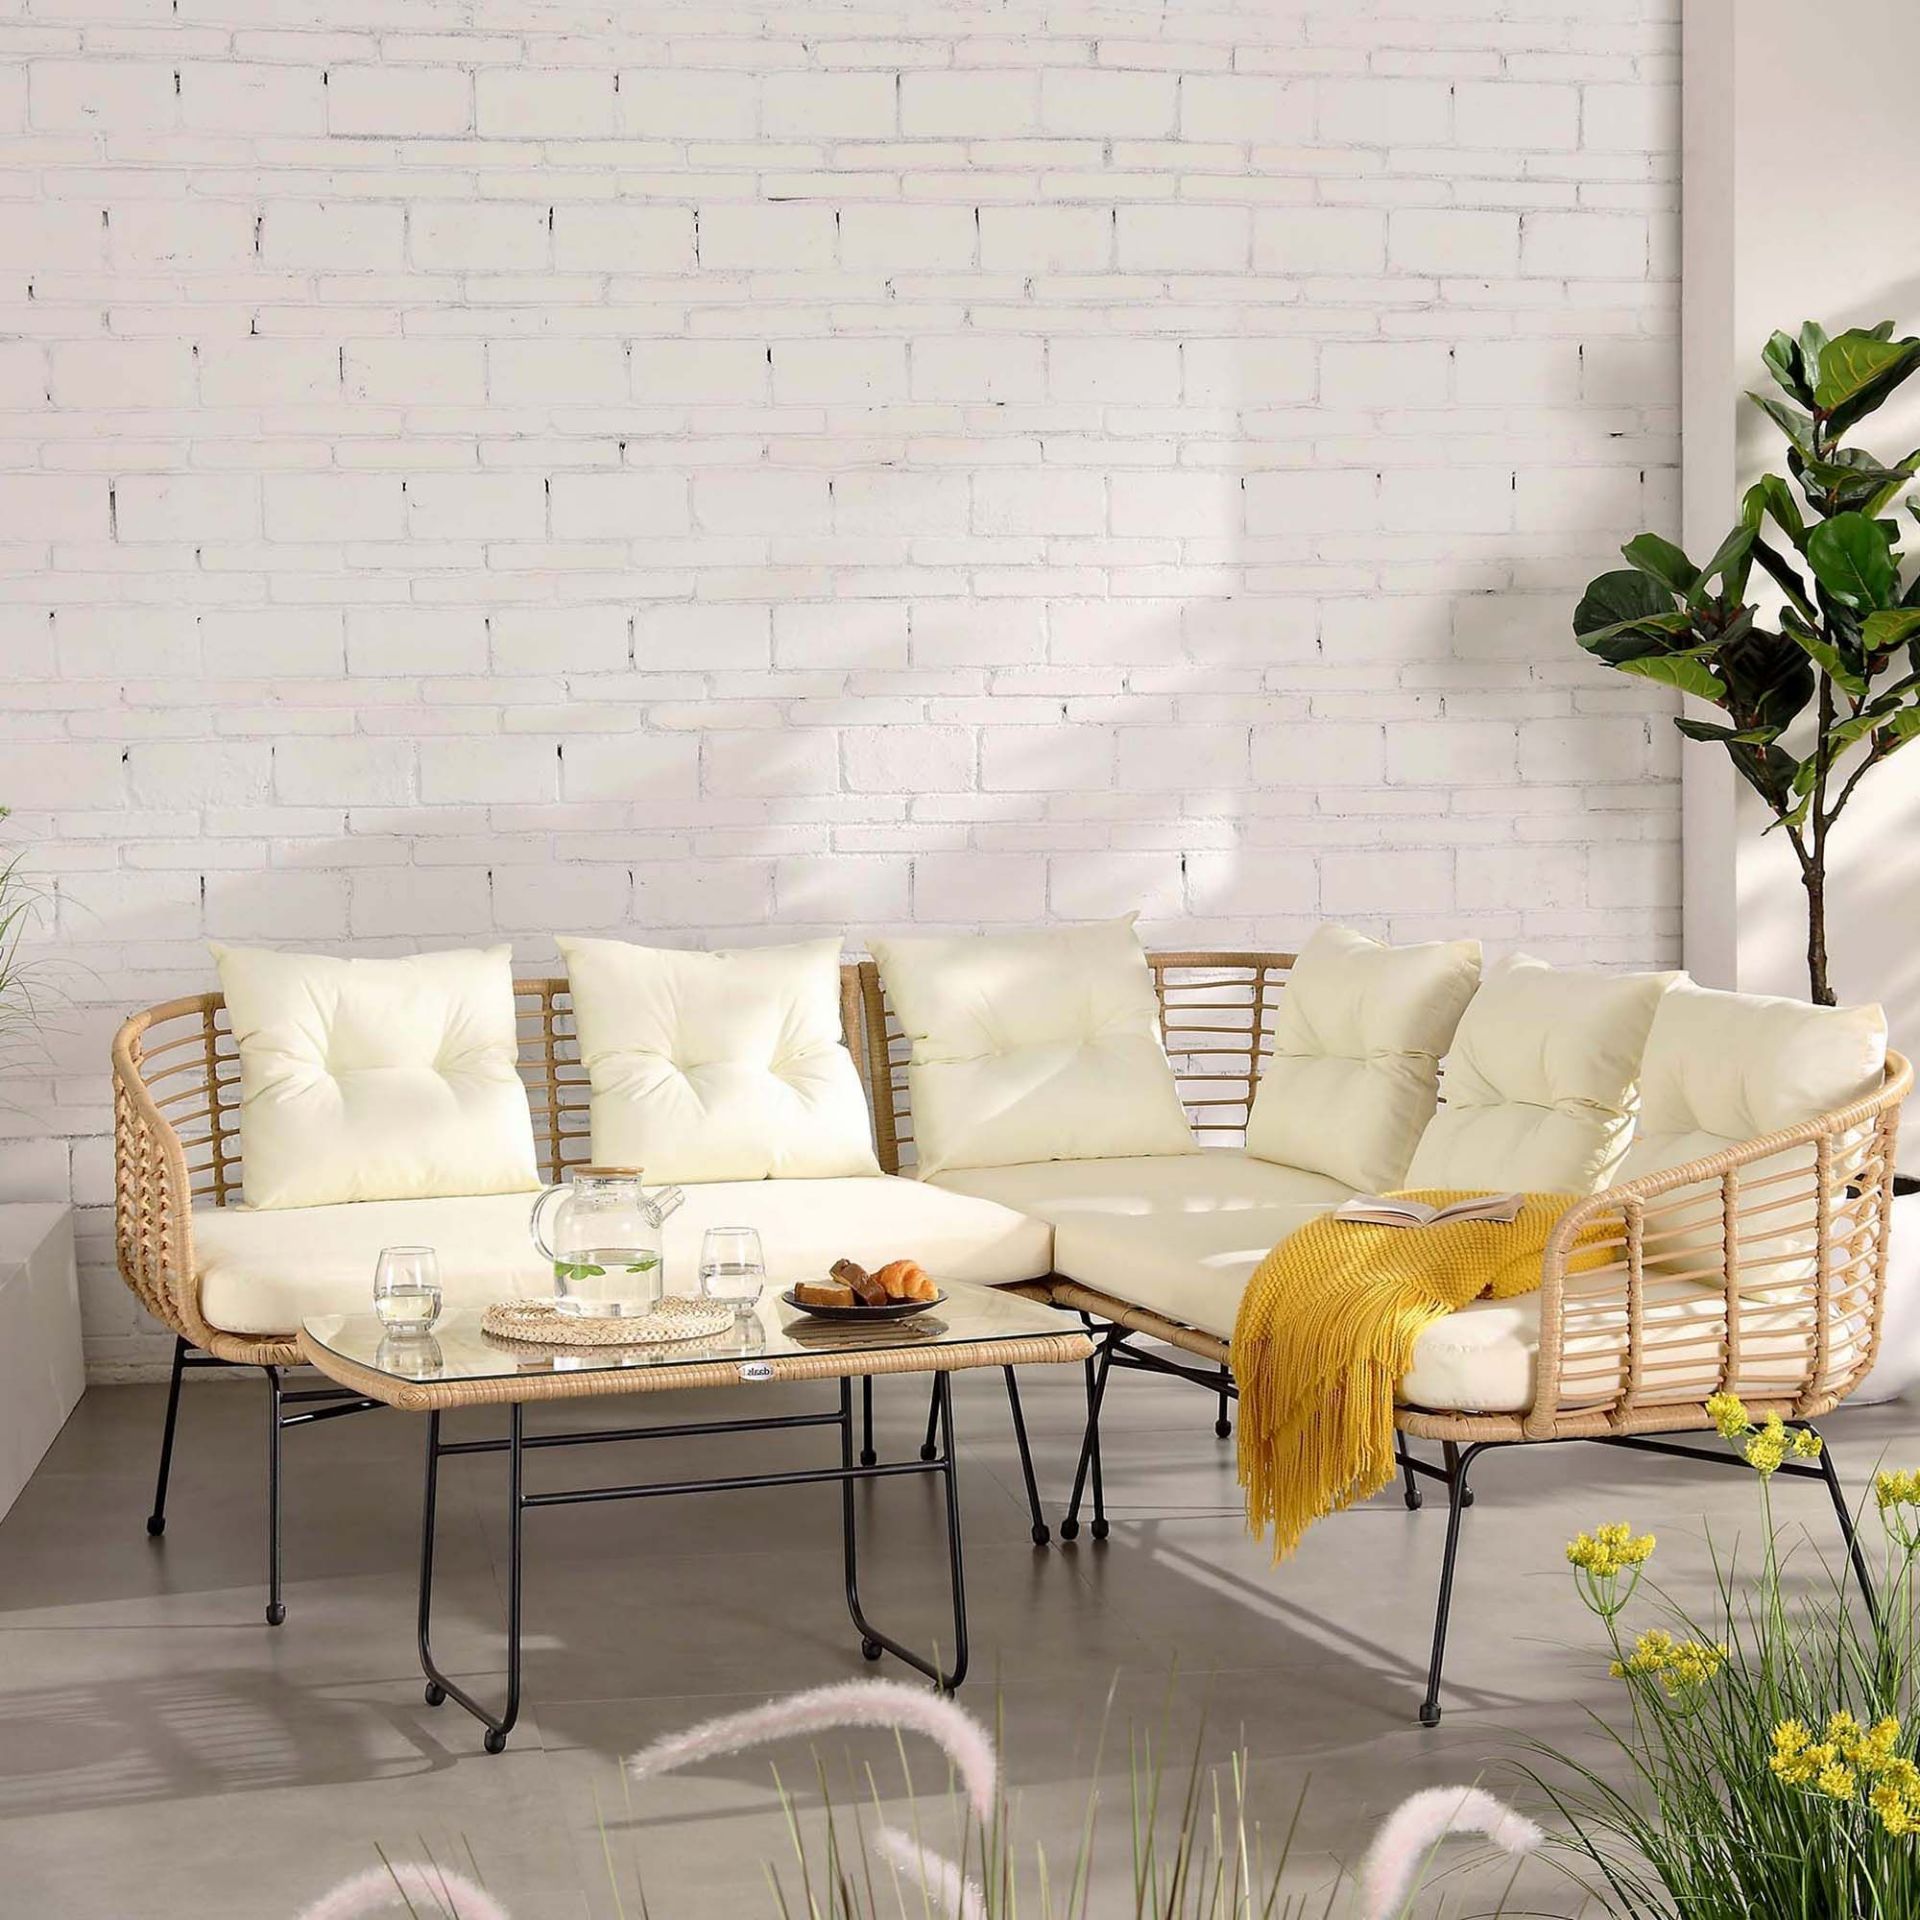 St Loy Natural Rattan Corner Sofa Set with Table. - R14. RRP £849.99. Comprising of two 2-seater